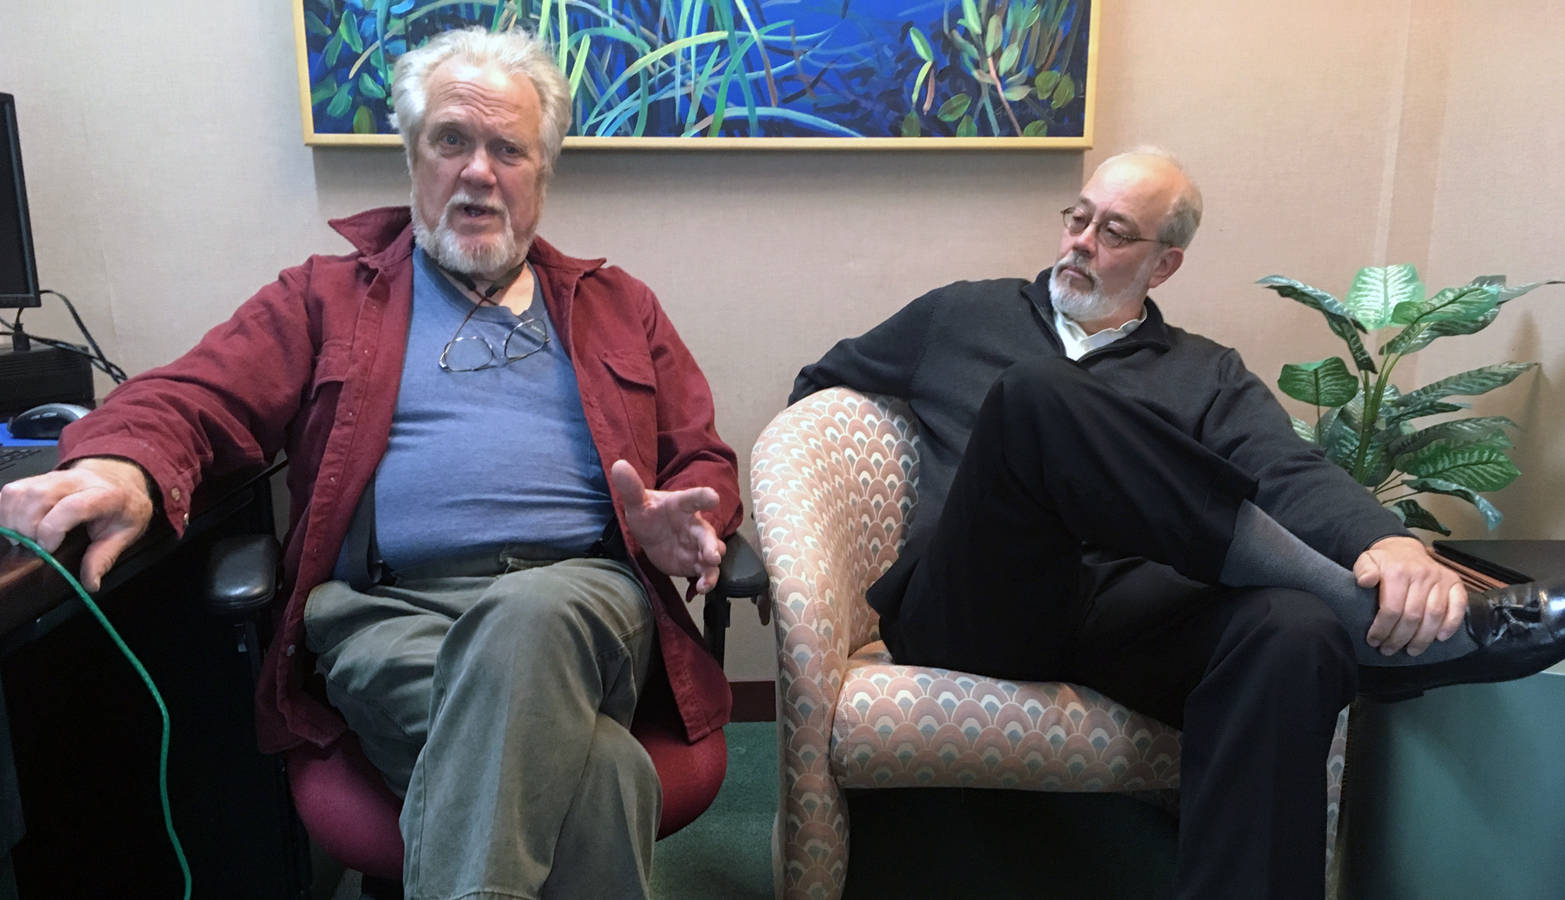 Eric Forrer, left, and Joe Geldhof, right, have sued the state of Alaska in an attempt to stop a plan that calls for borrowing up to $1 billion from global bond markets to pay oil and gas tax credits owed by the state. They are pictured May 22, 2018 in an interview at the Juneau Empire. (James Brooks | Juneau Empire)